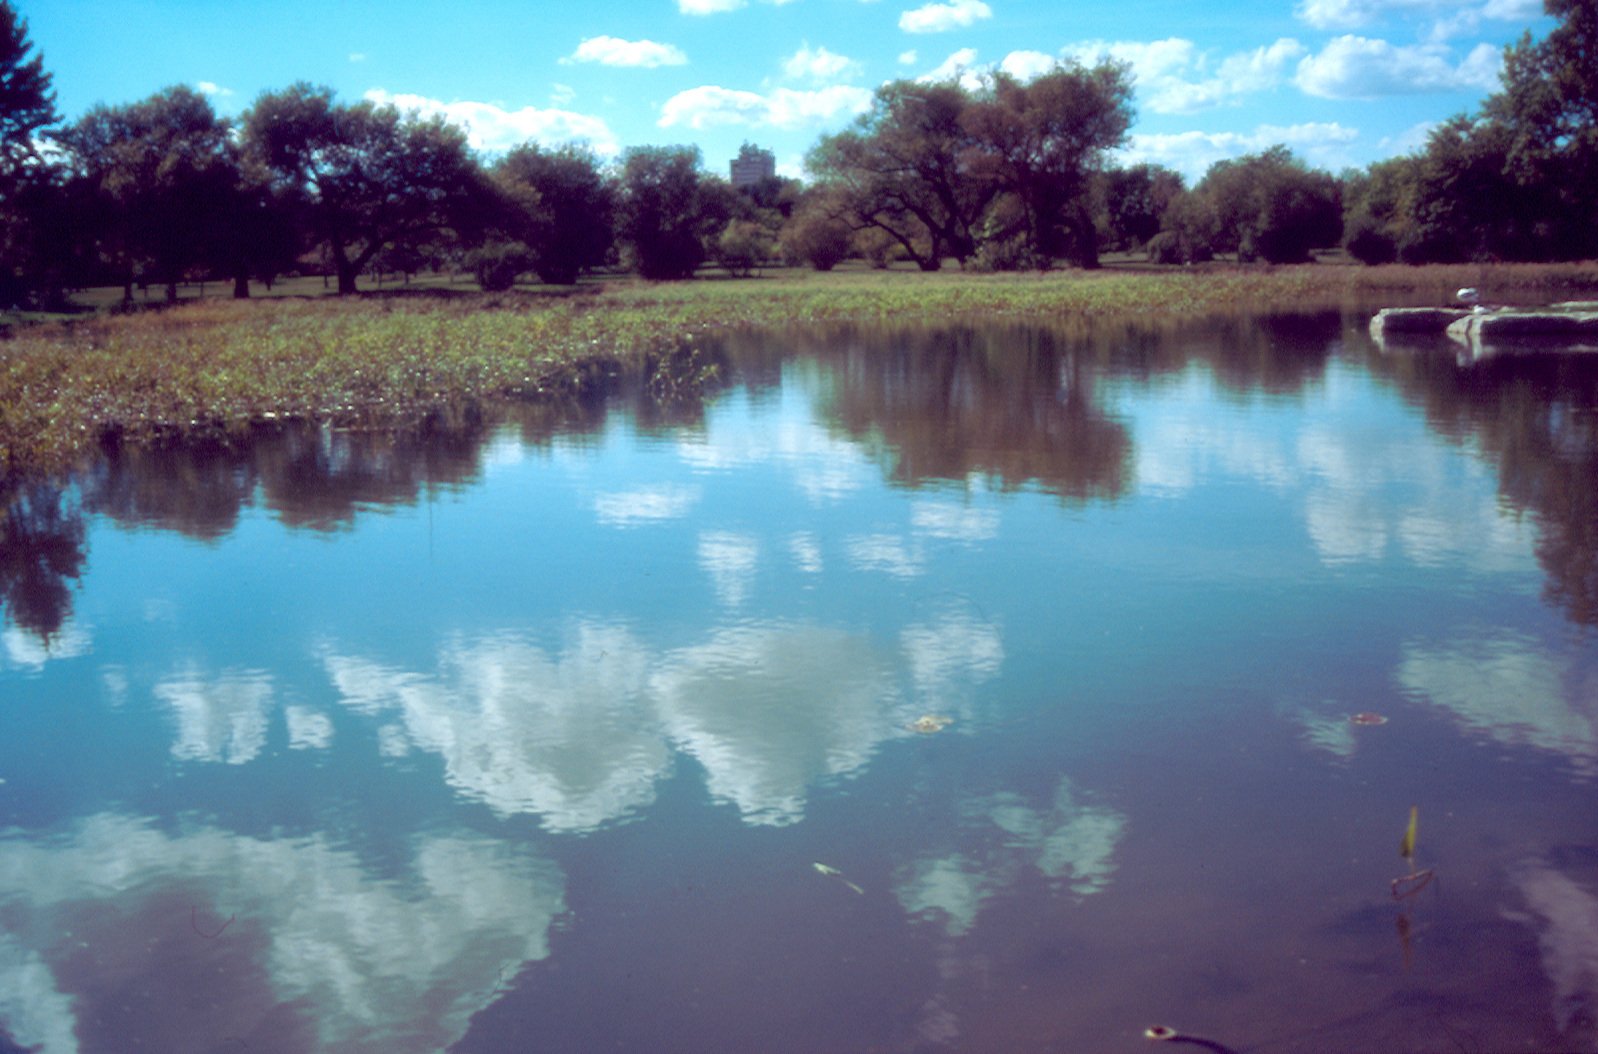 a large body of water near trees in the field